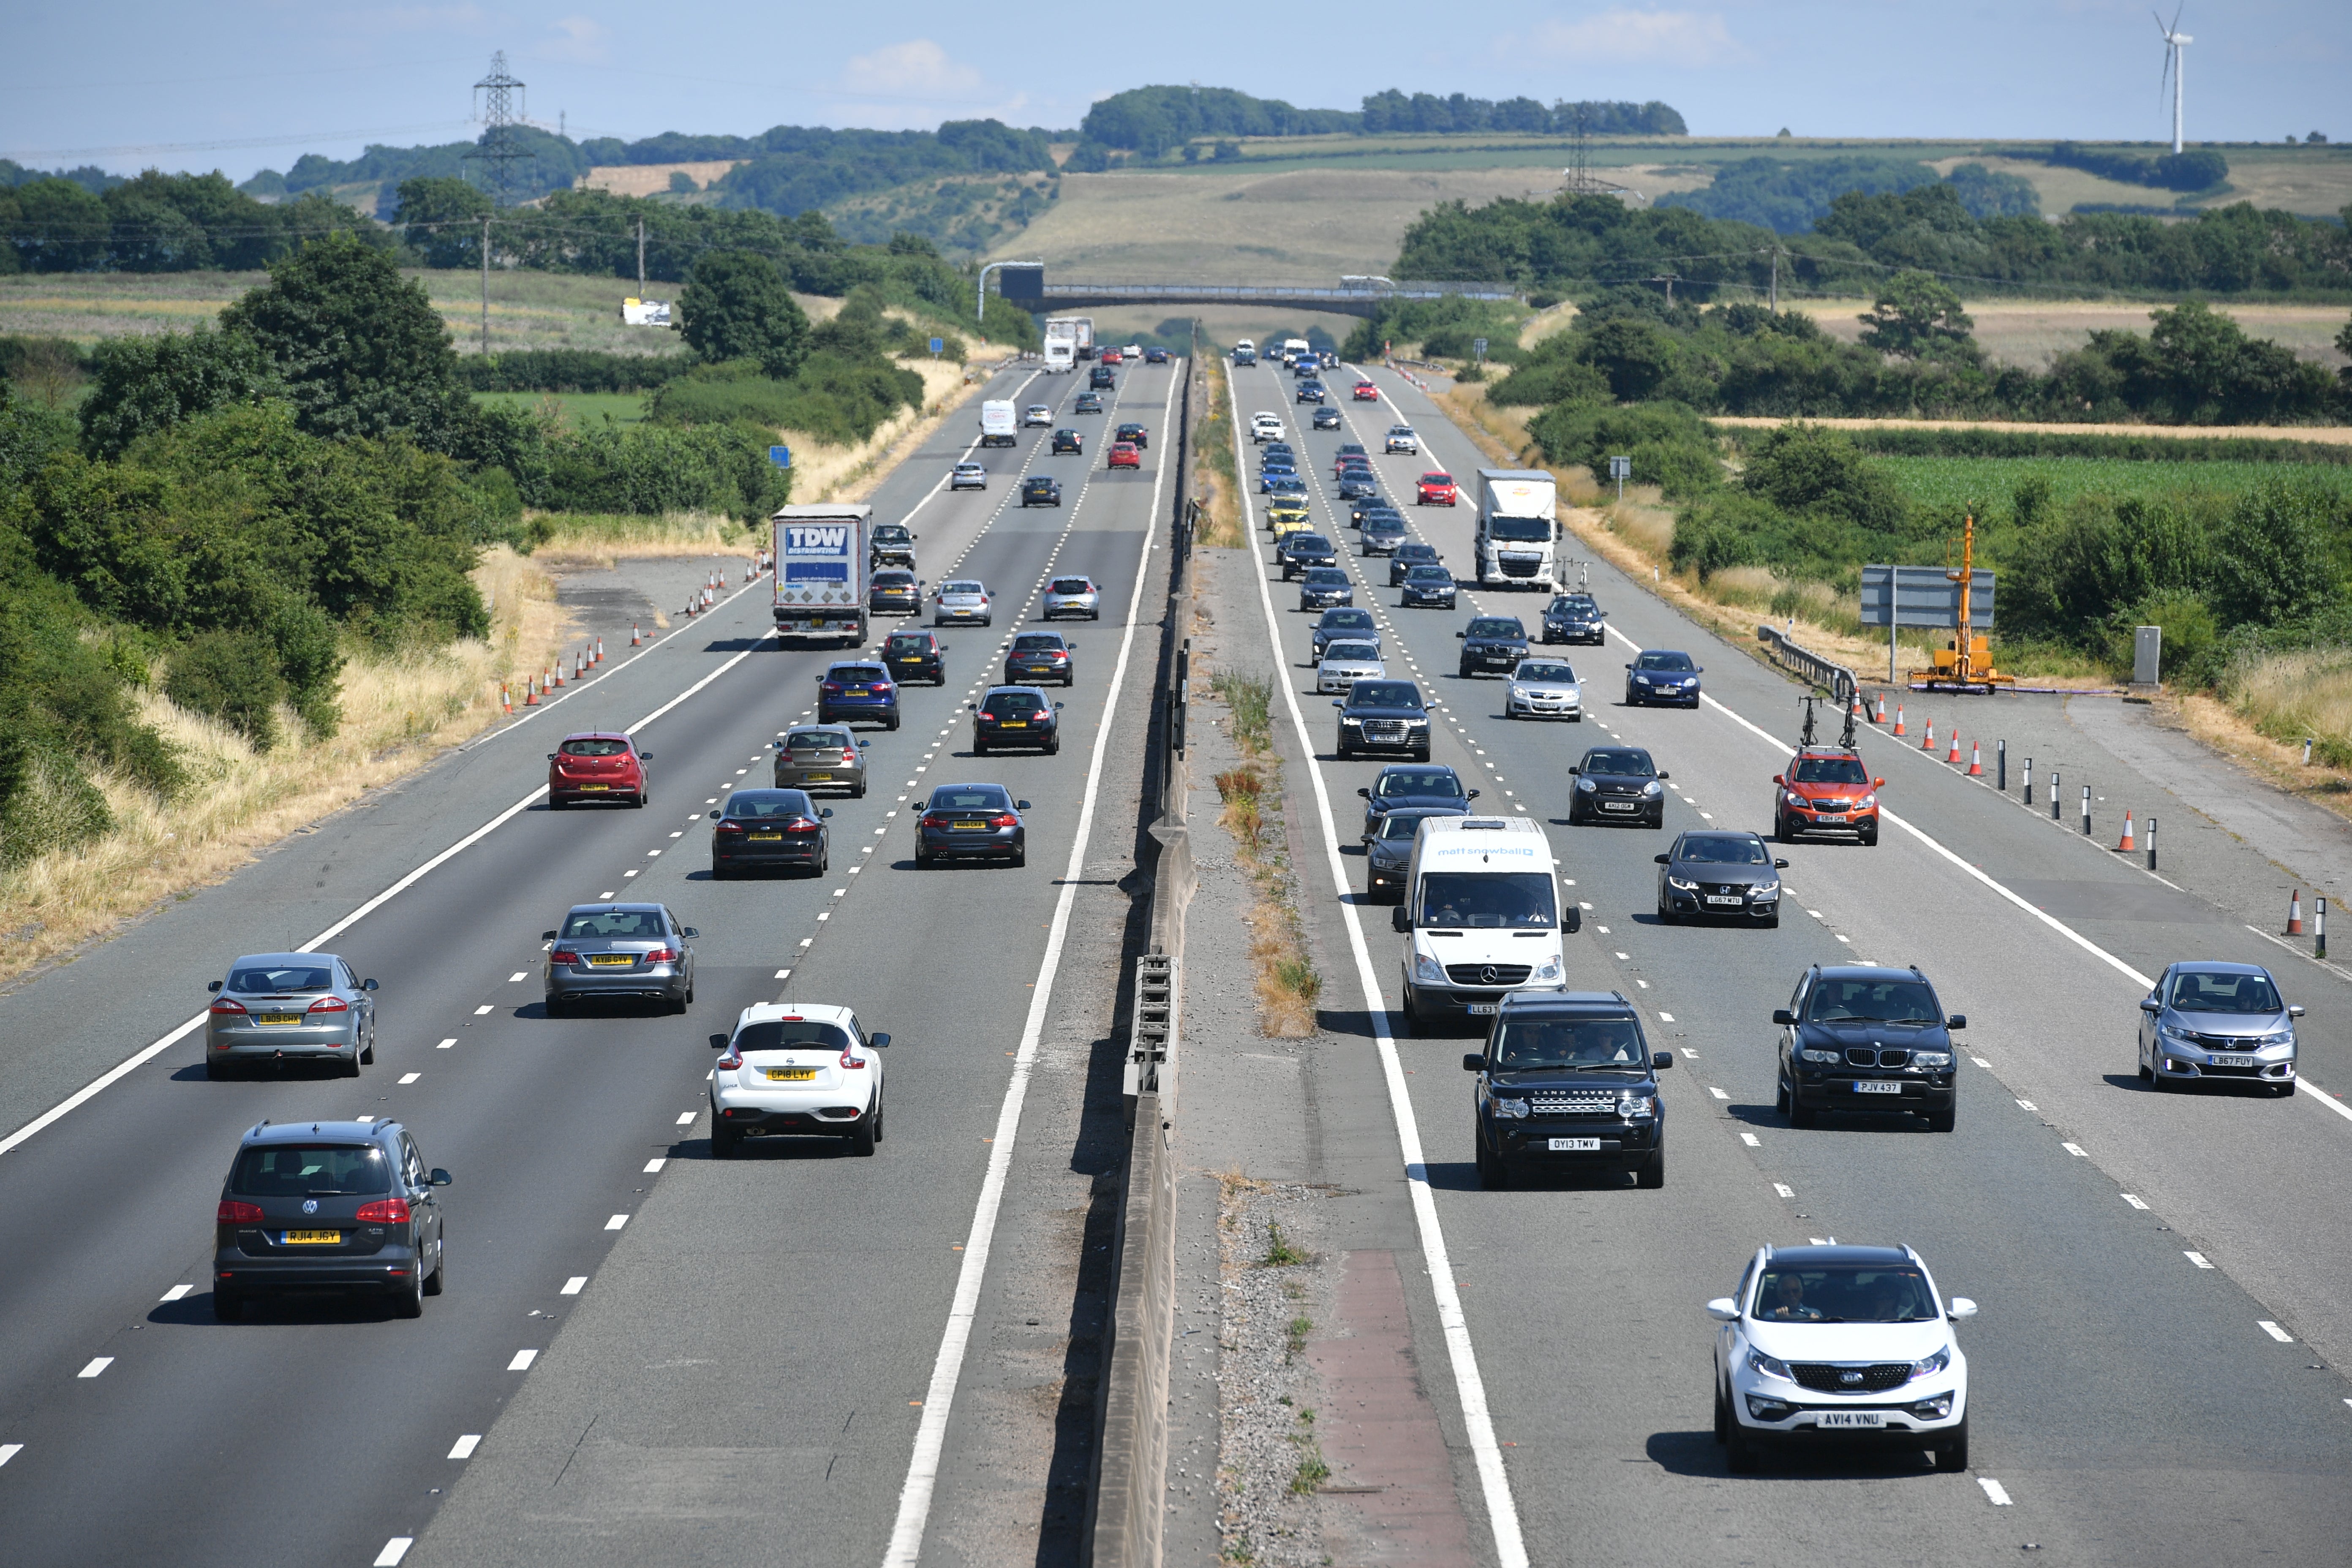 Car insurance costs in the UK are "skyrocketing" compared to the rest of Europe